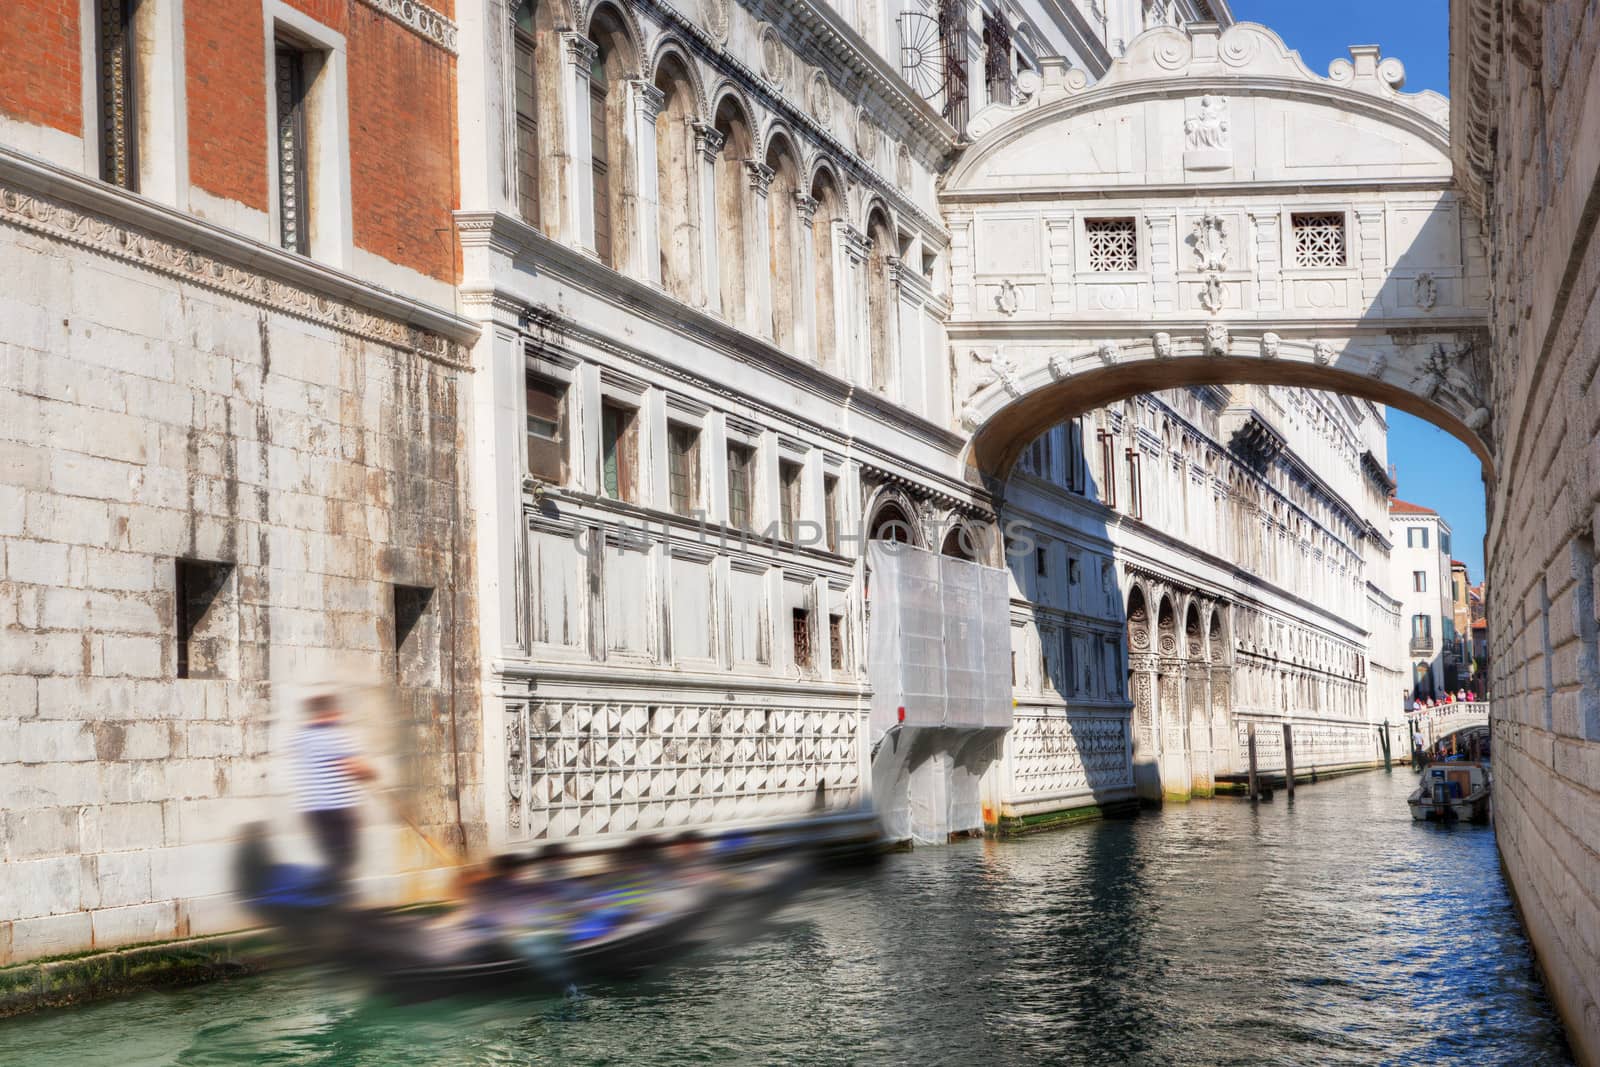 Venice, Italy. The Bridge of Sighs, gondola floats on a canal among old Venetian architecture